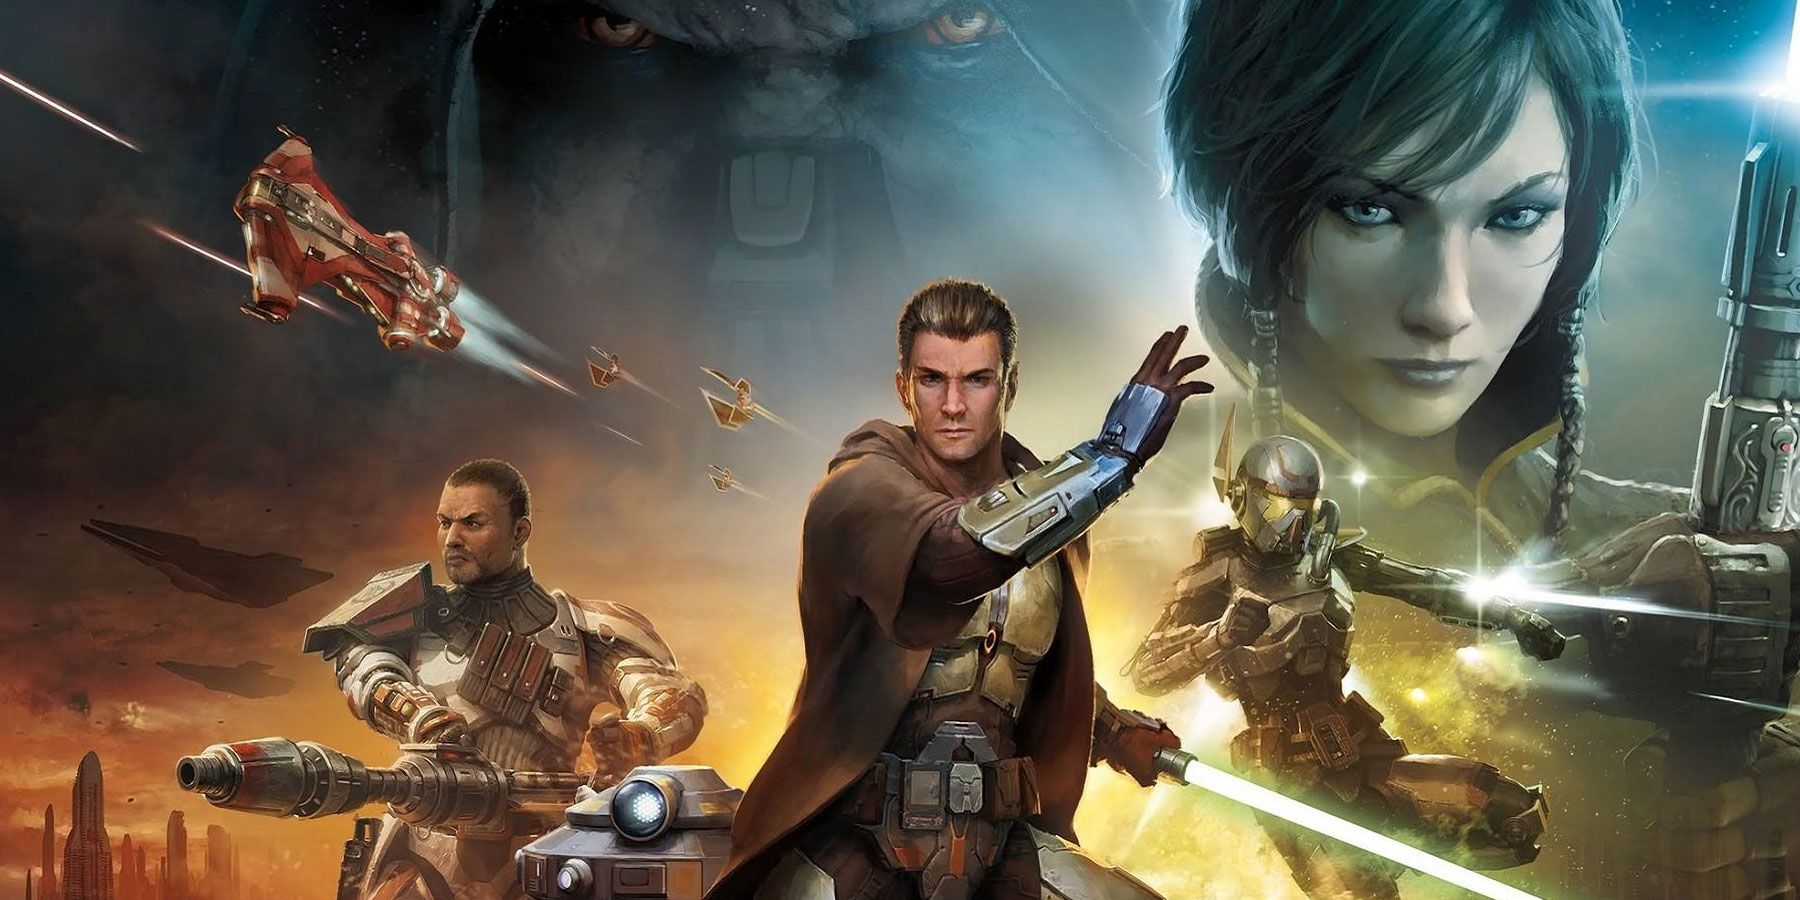 A collage of different character classes in key art for Star Wars: The Old Republic MMORPG.